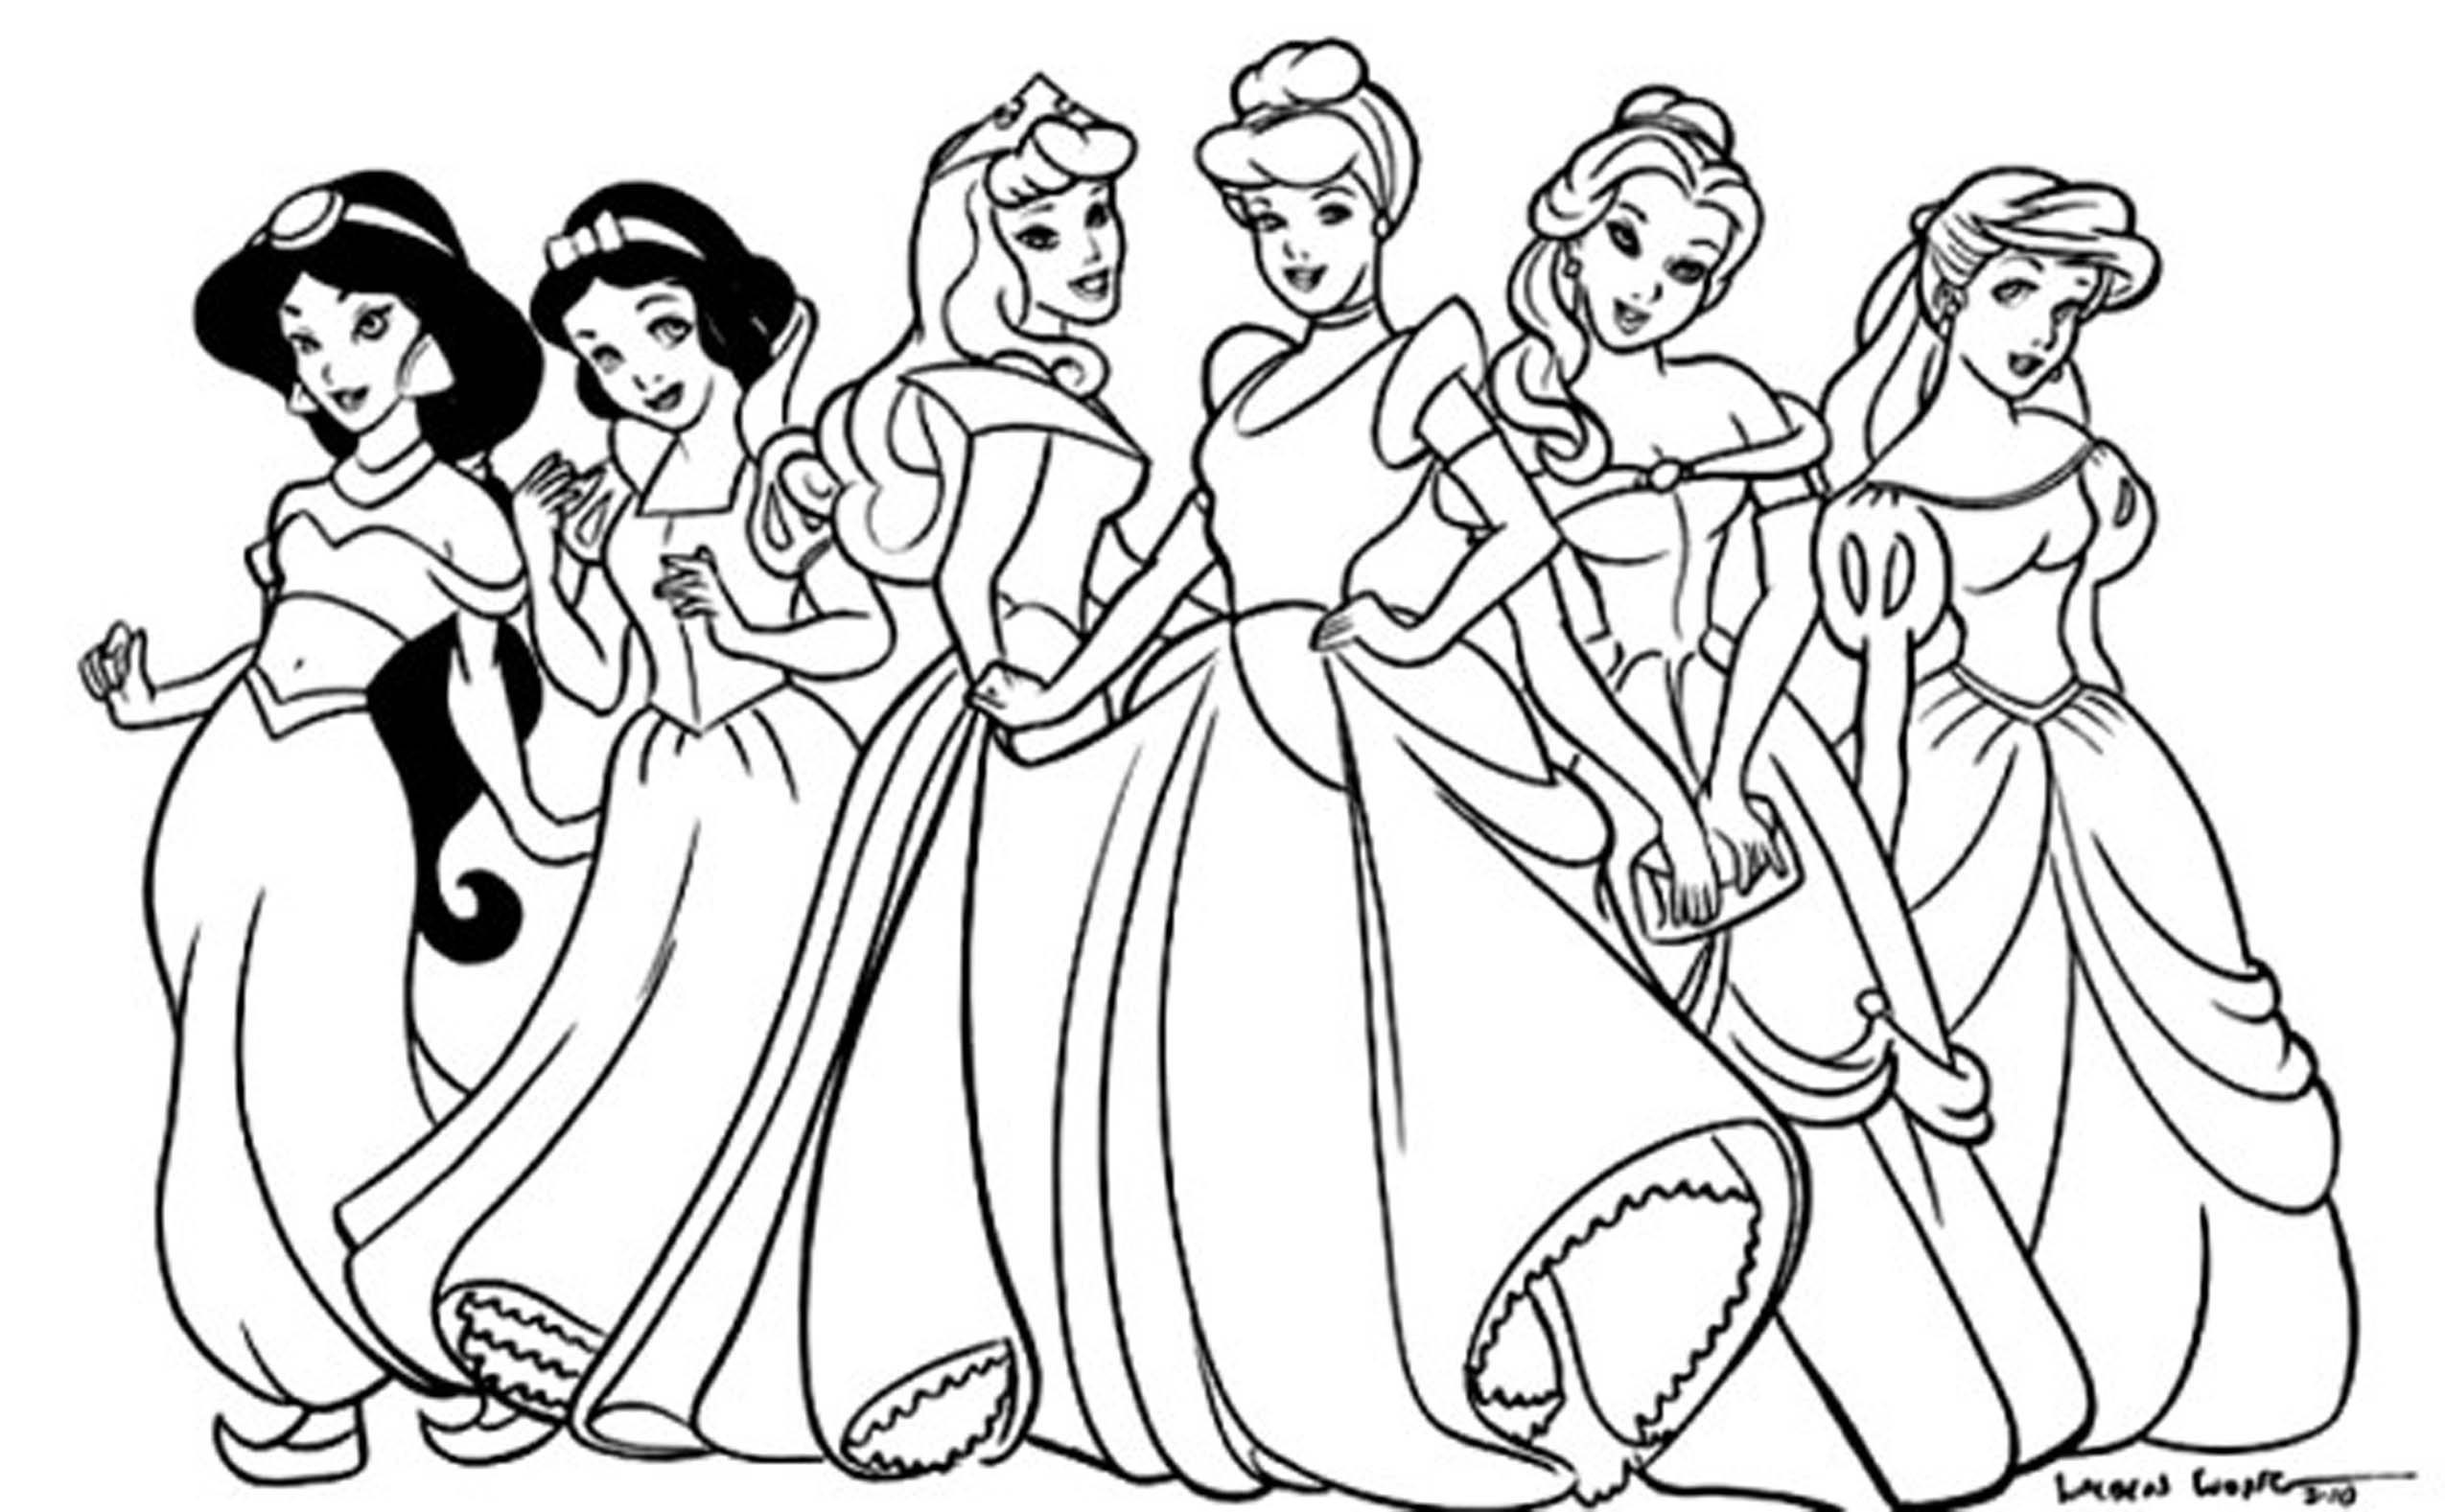 Free Coloring Pages Princesses
 Disney Princesses More than 25 free images to print and